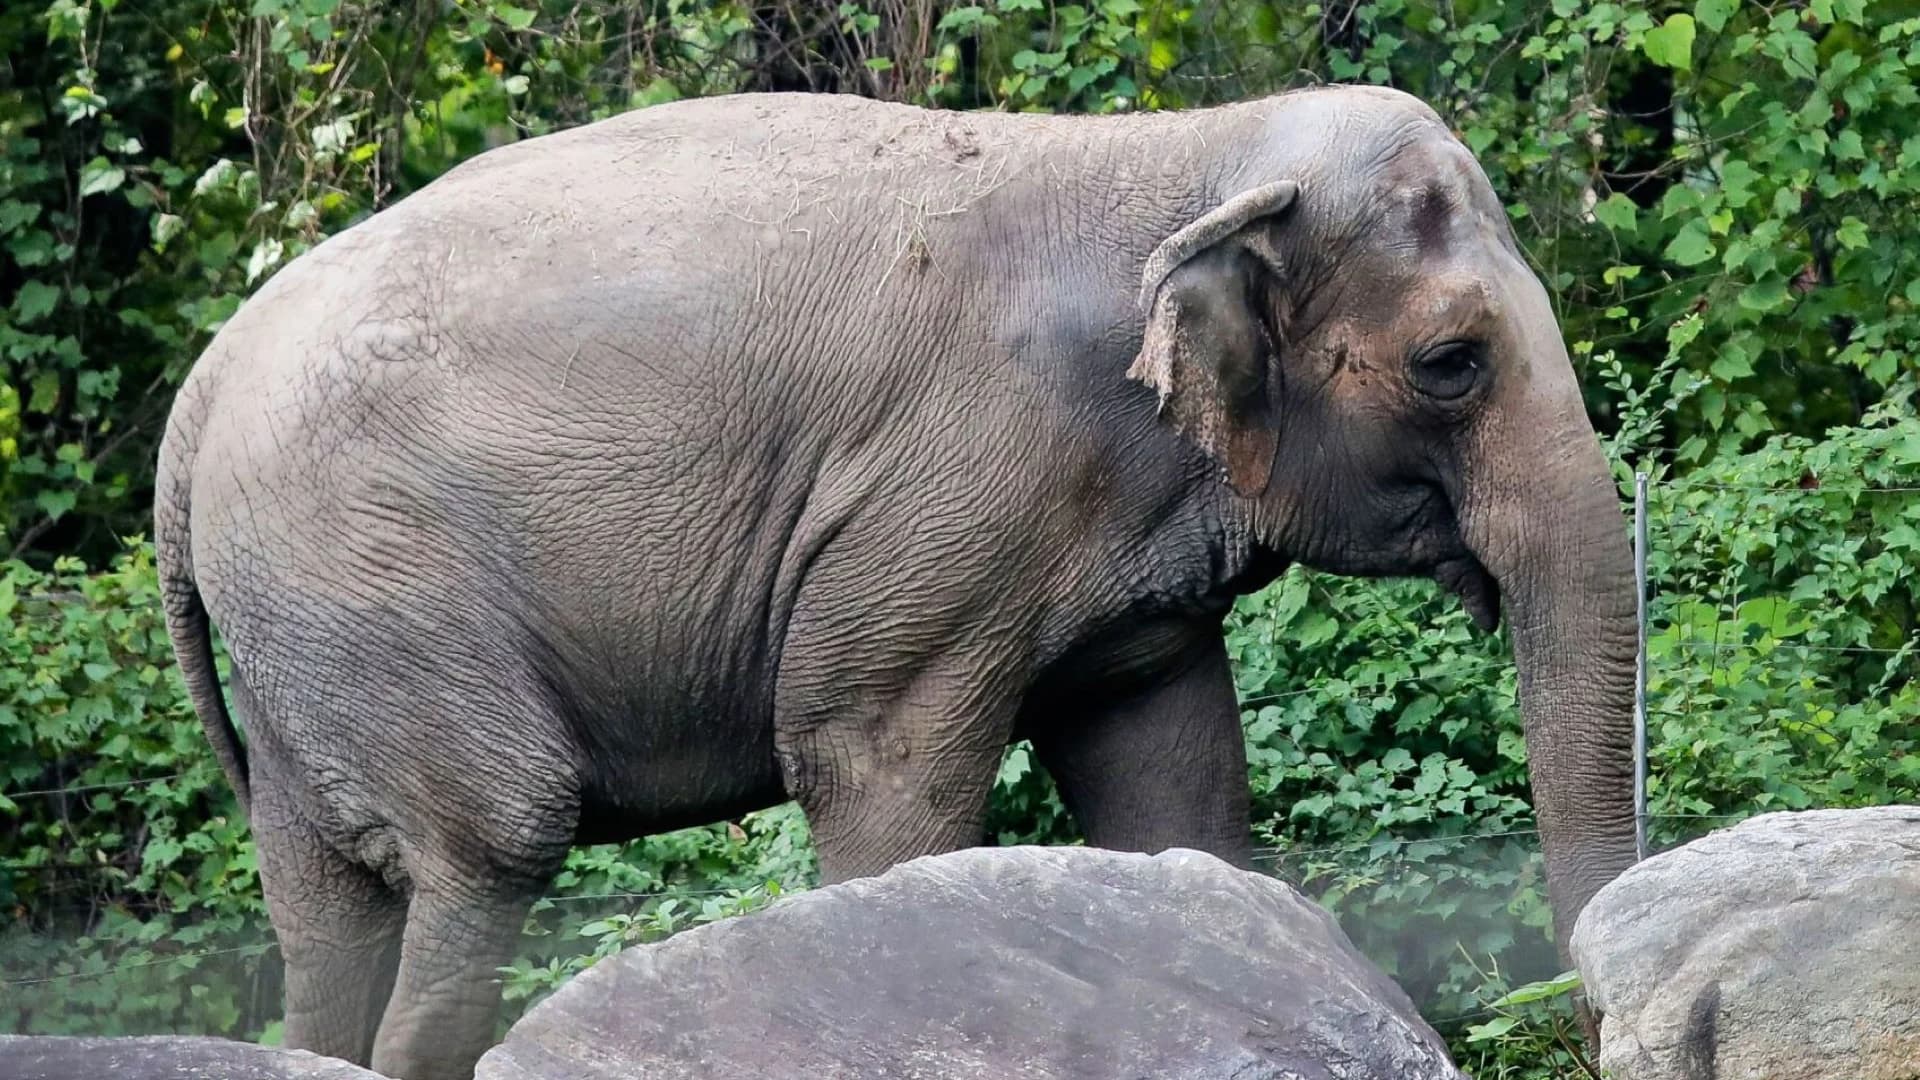 Does the Bronx Zoo's Happy the Elephant deserve basic human rights?